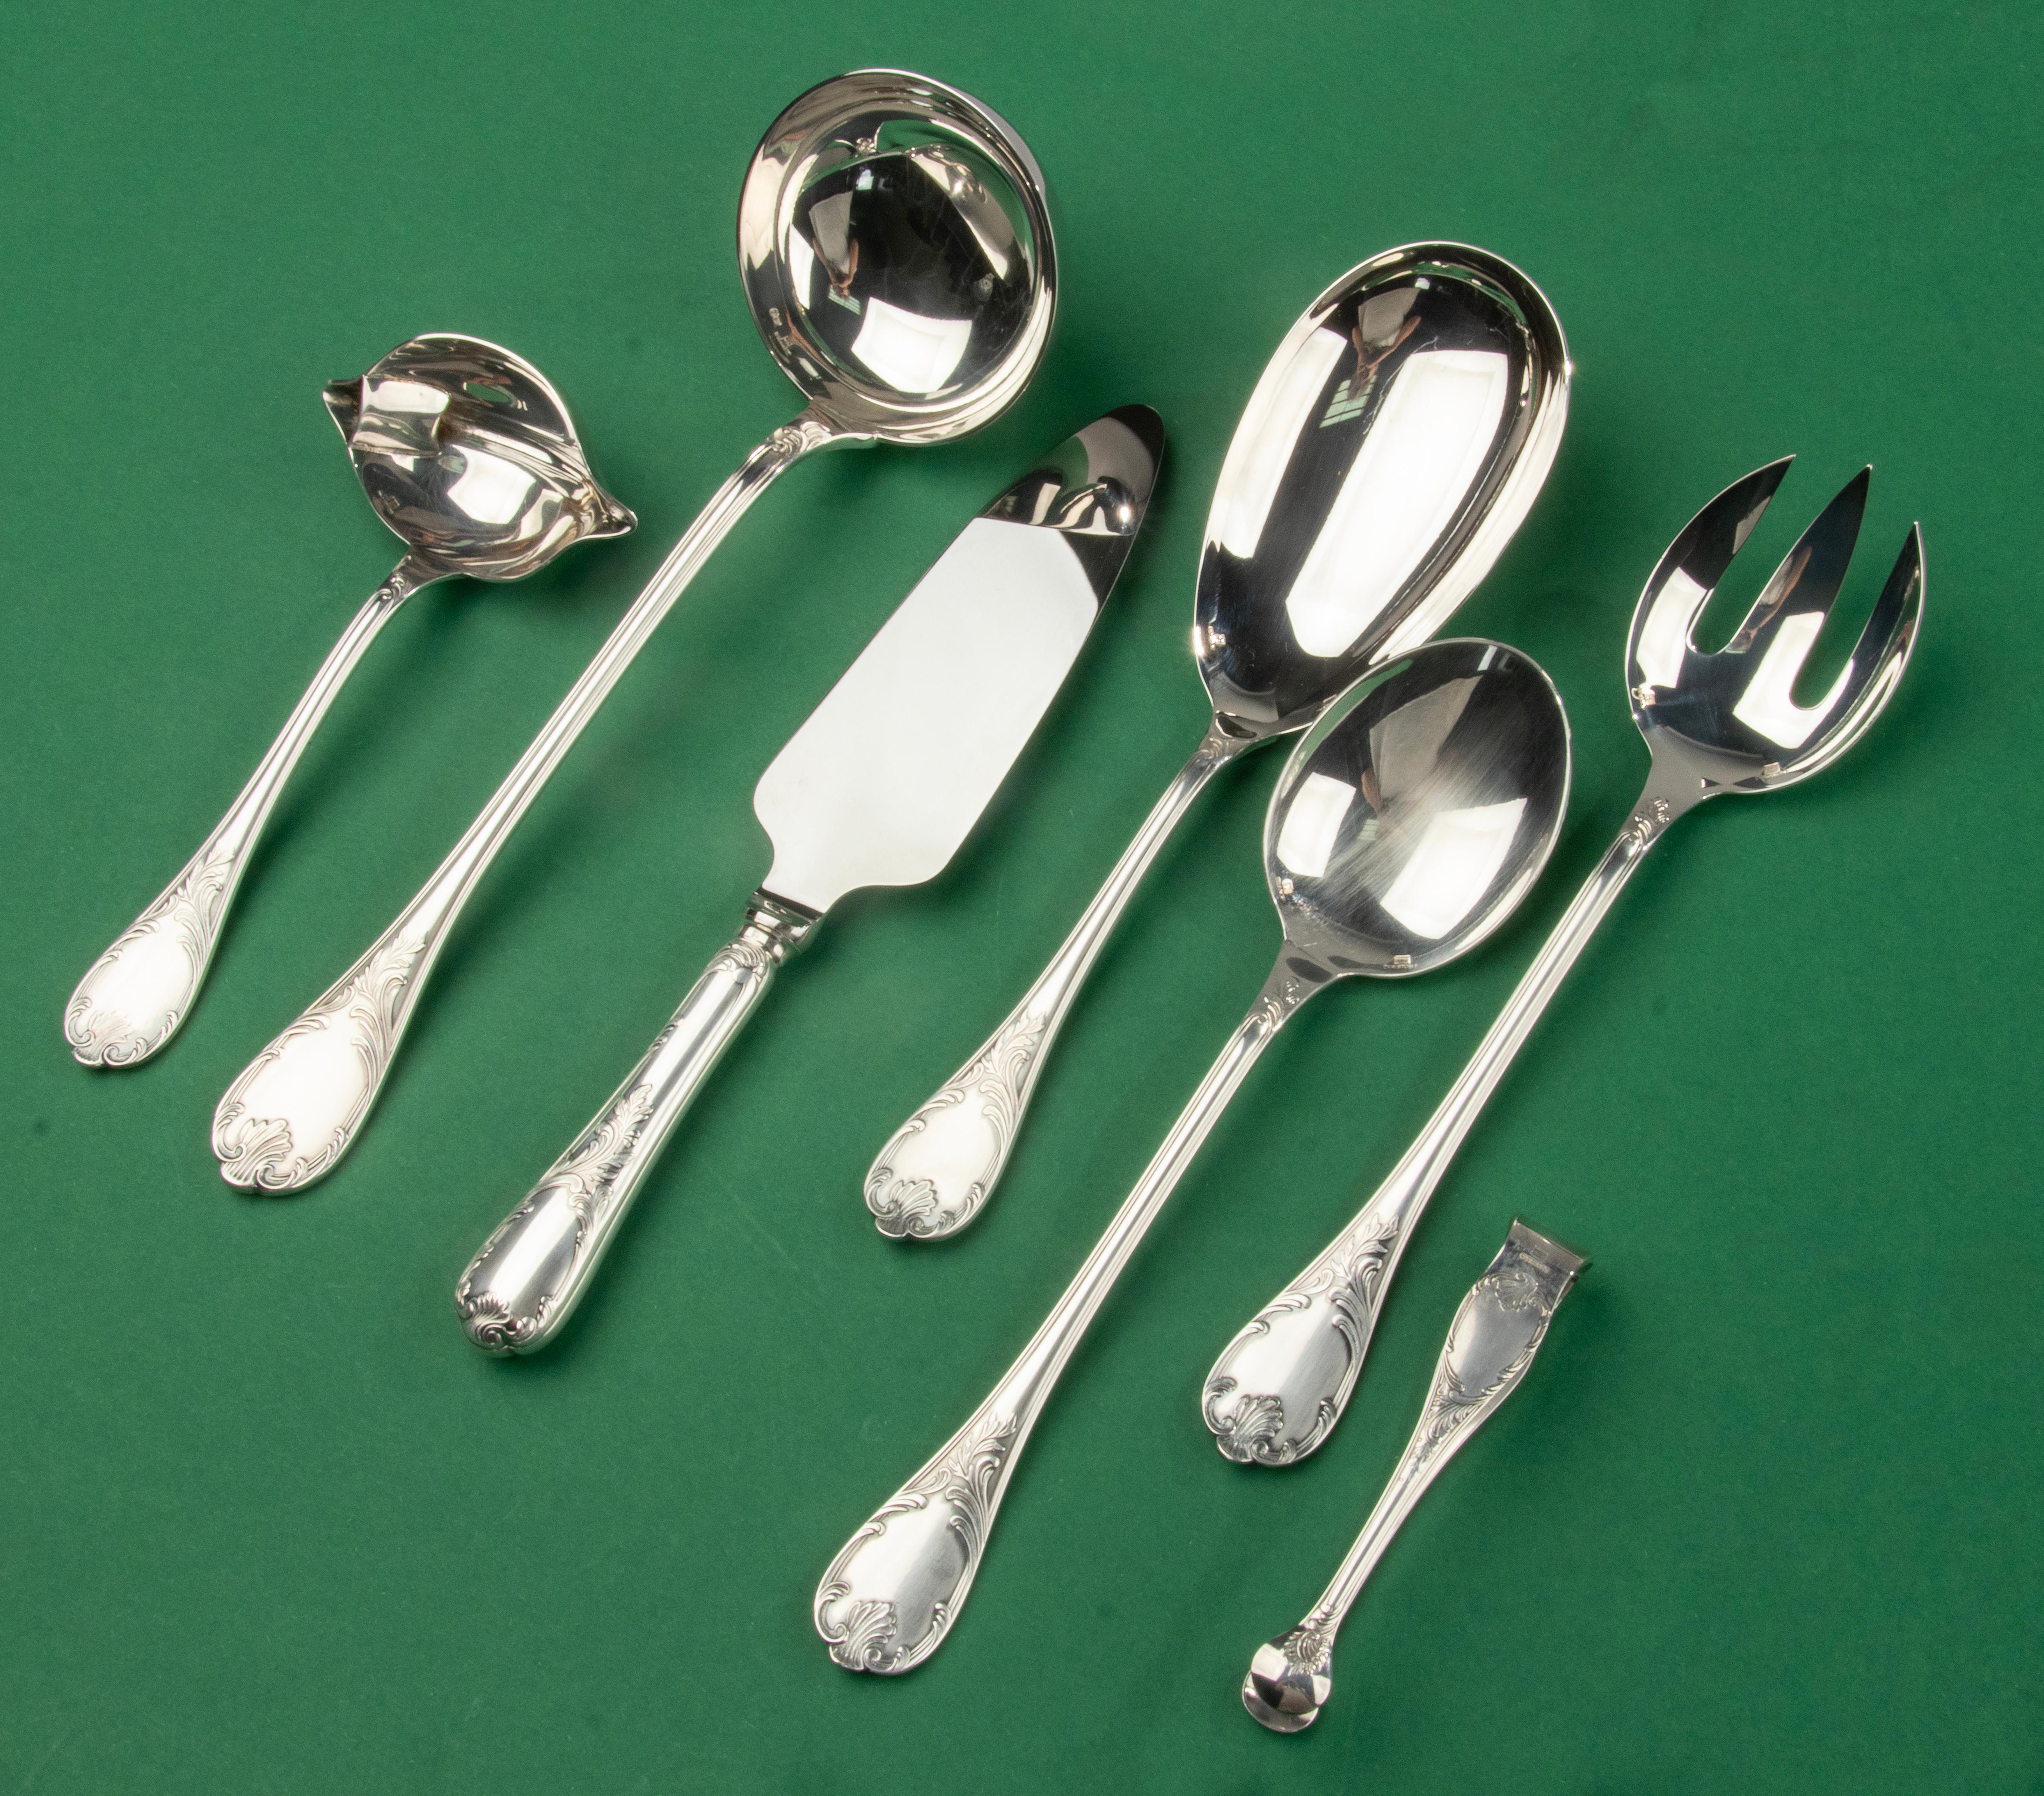 128-Piece Set Silver-Plated Tableware - Christofle - Model Marly - Complete  4